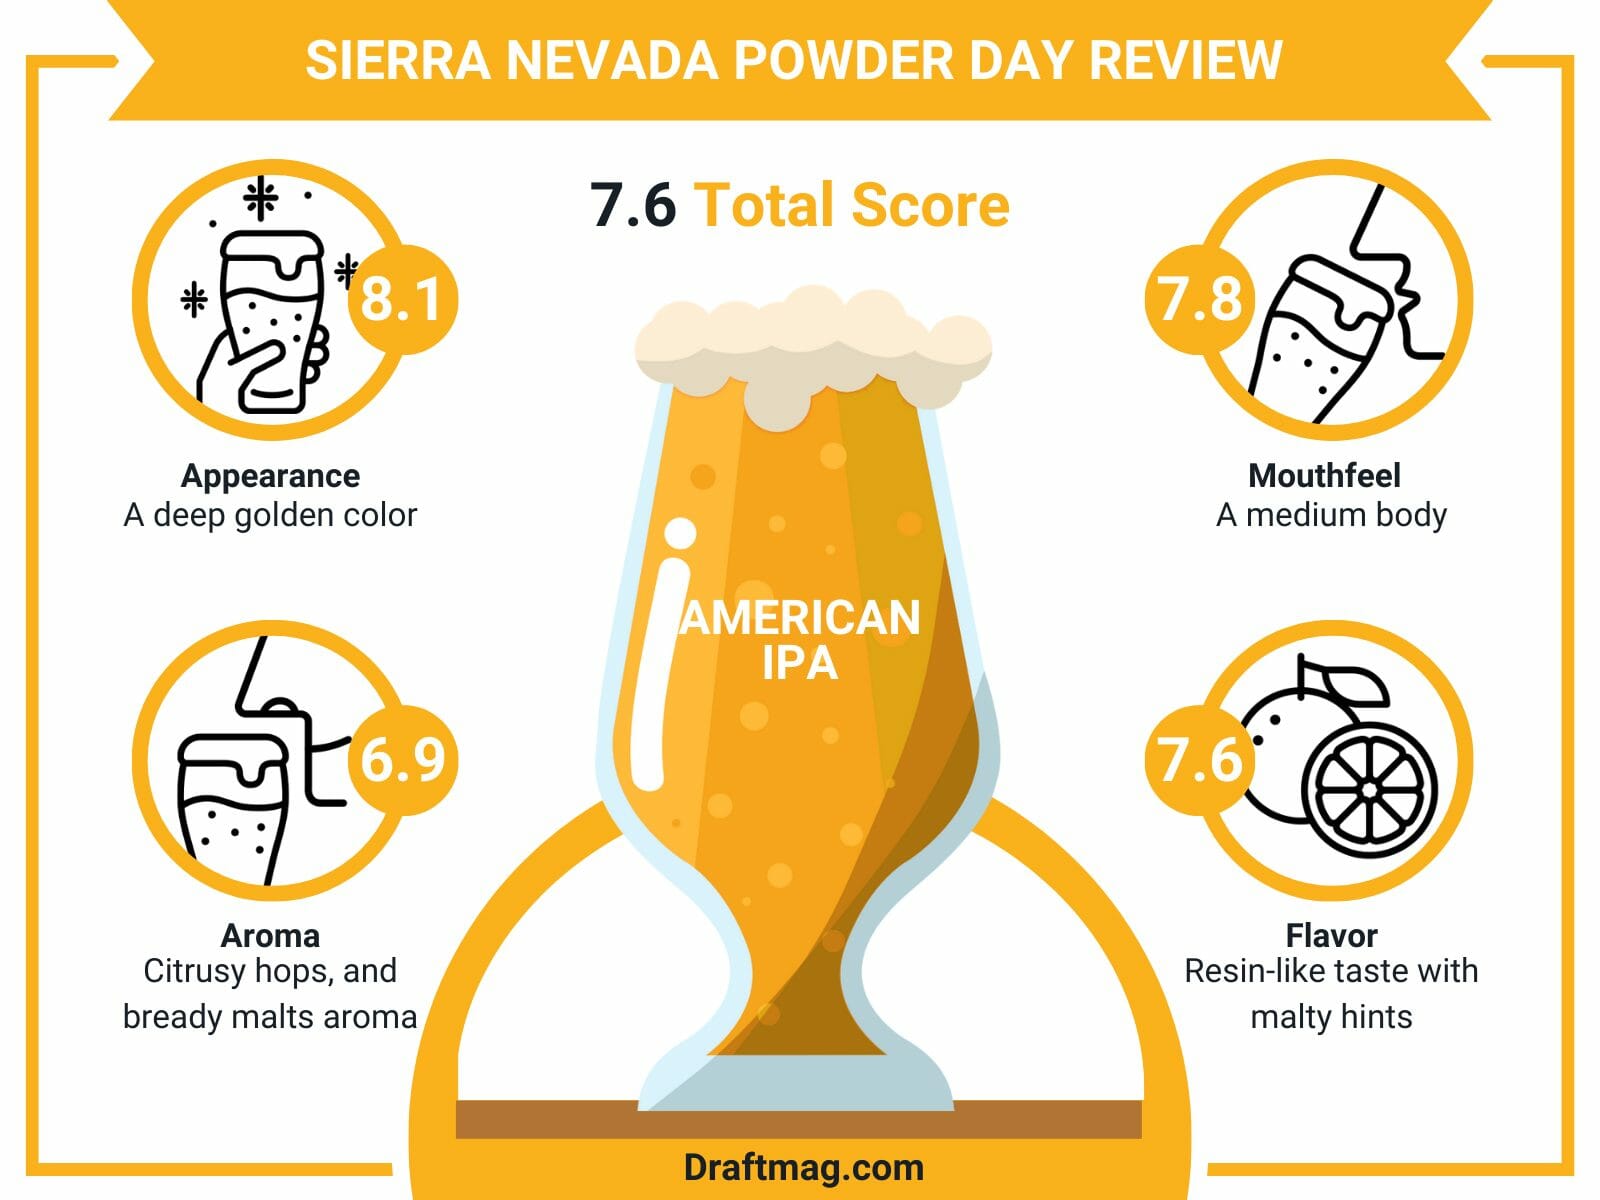 Sierra nevada powder day review infographic